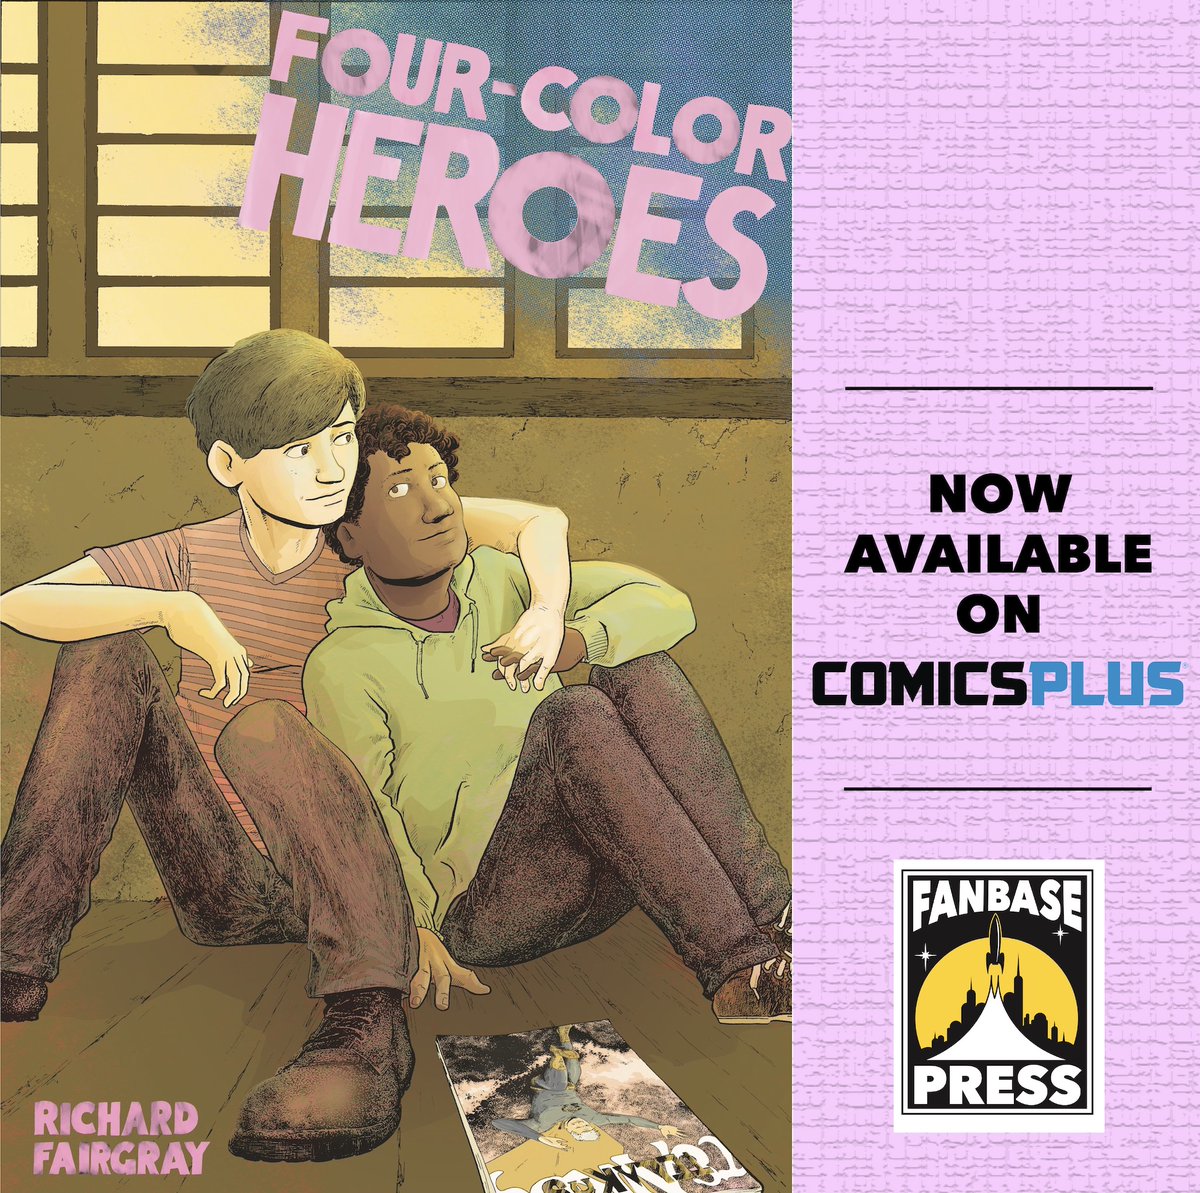 .@4ColorHeroesGN is available digitally on @comicsplus from @Fanbase_Press! The #LGBTQIA+ coming-of-age #GraphicNovel follows 2 boys from wildly different worlds who find love & self-discovery through #comics | #Superheroes #MentalHealth #GraphicMedicine lpfullcontent.librarypass.com/product/fanbas…